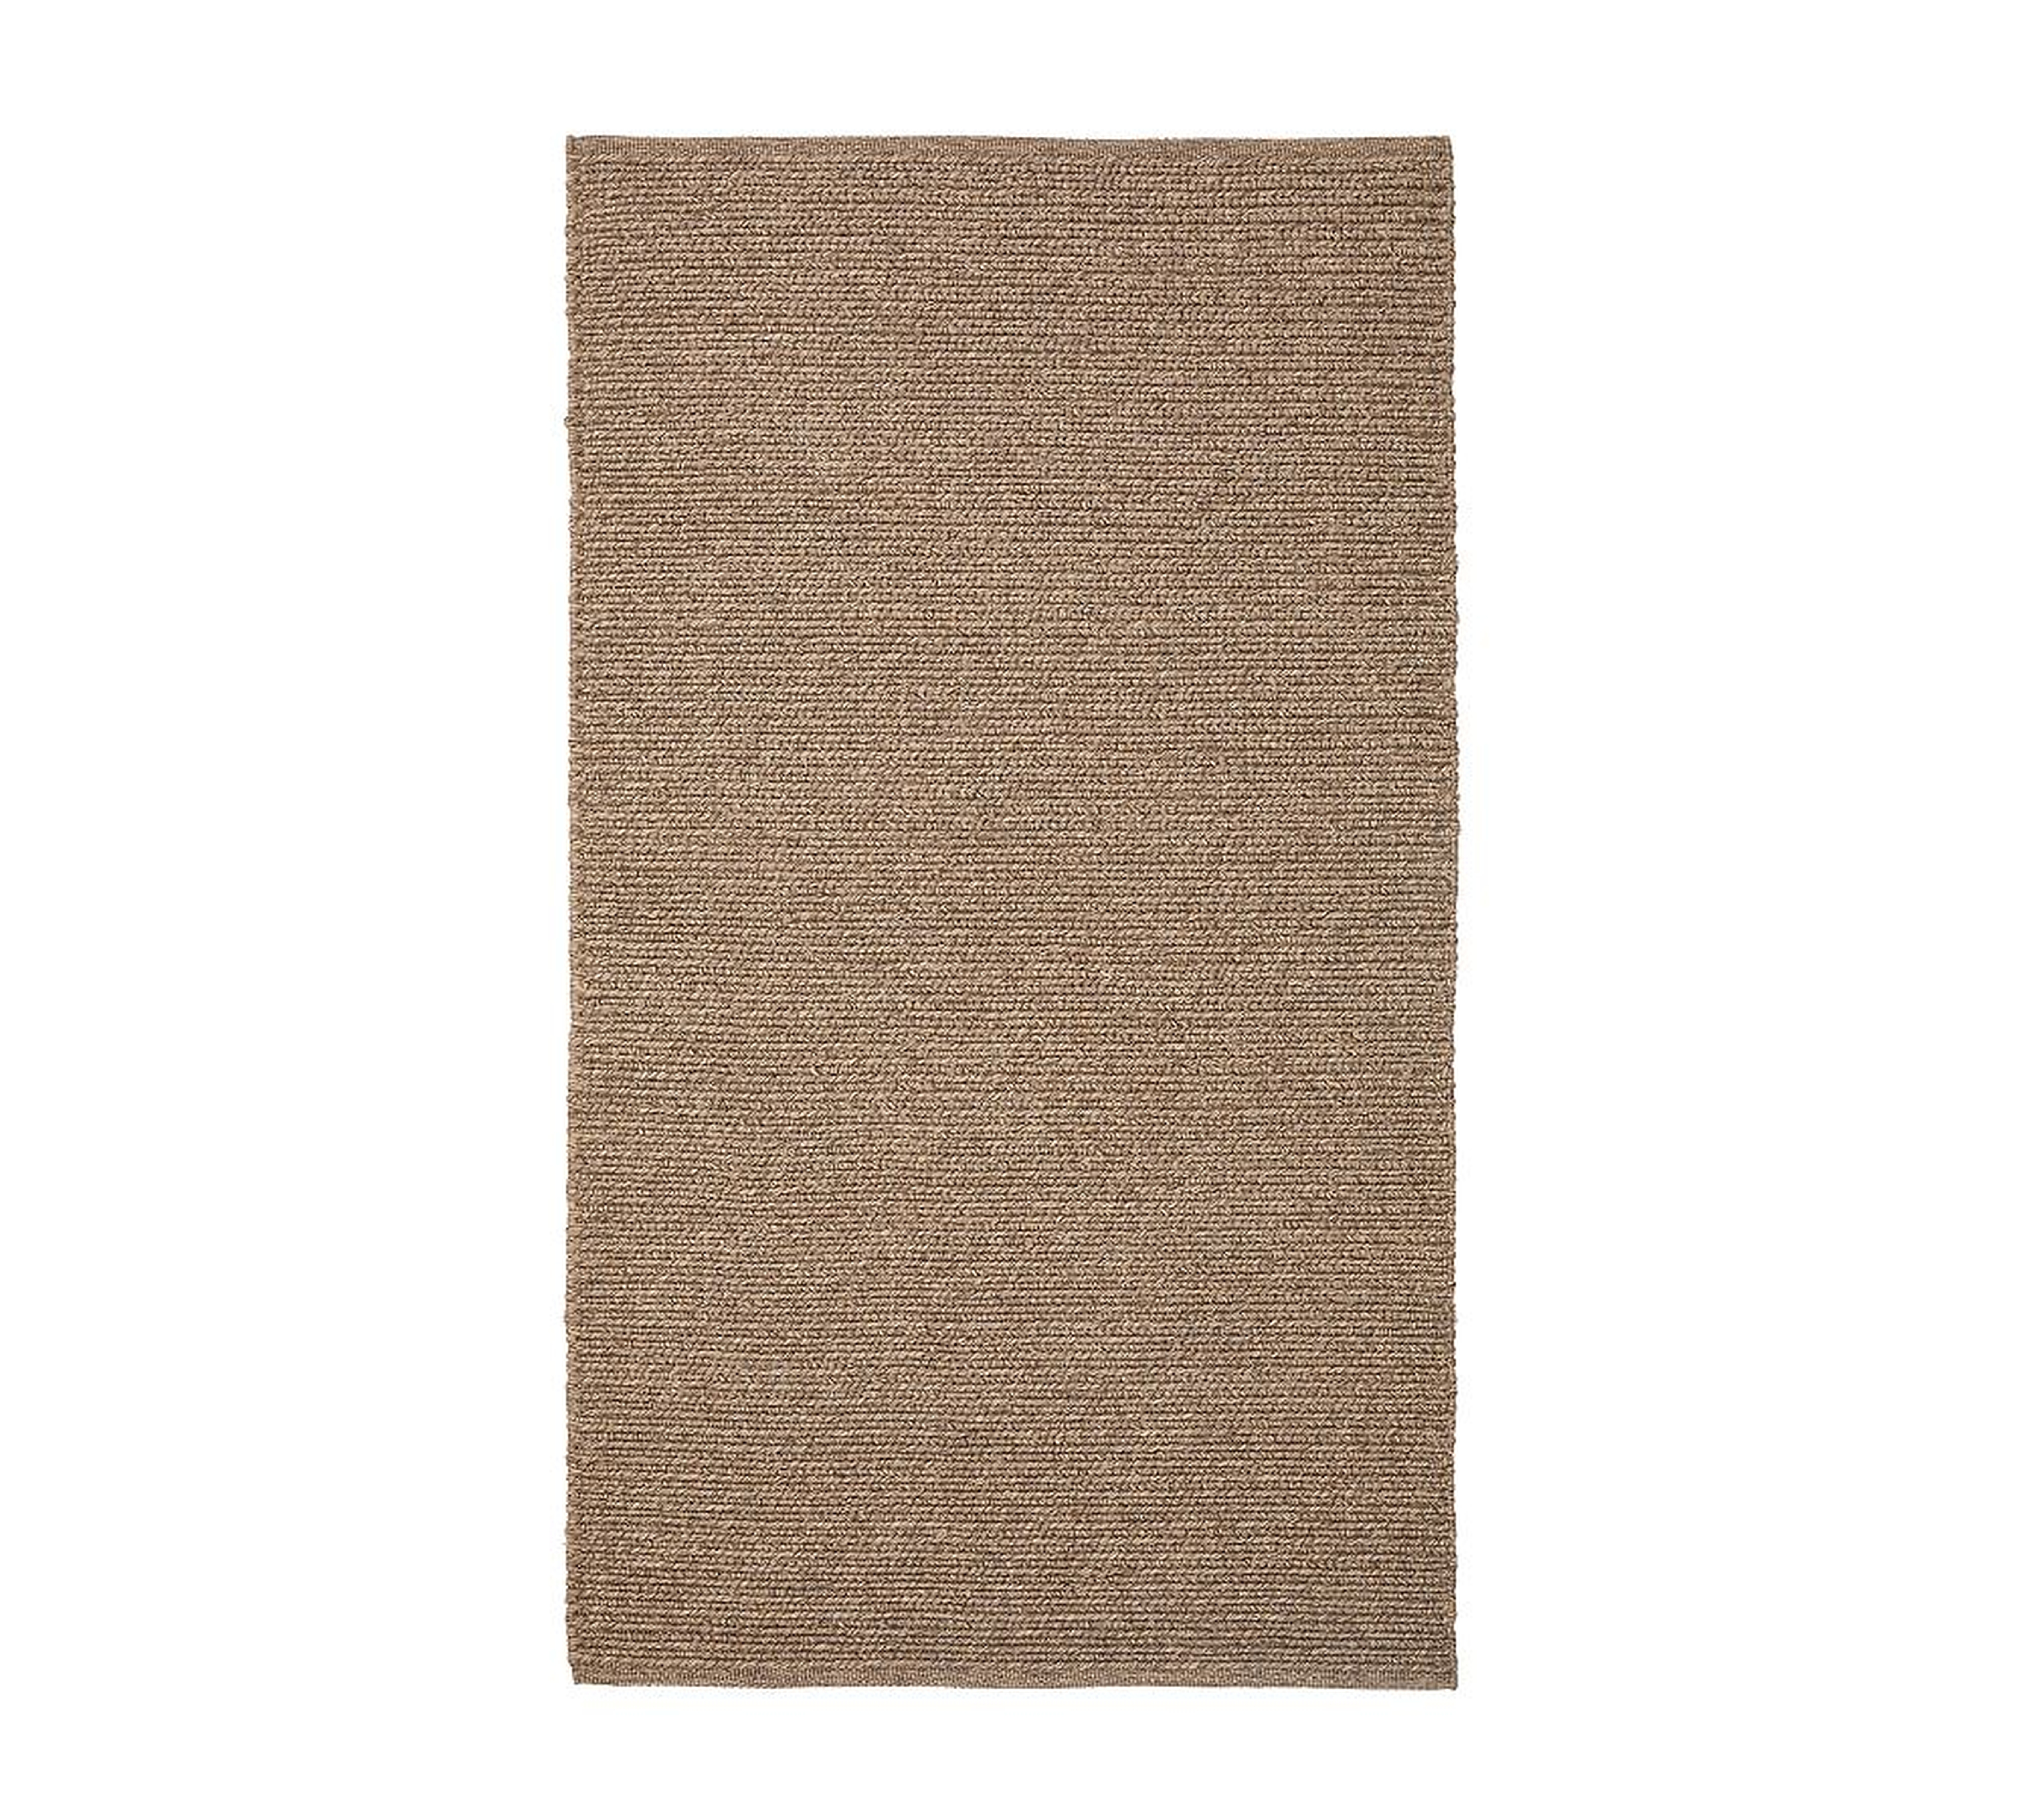 Performance Faux Natural Fiber Indoor/Outdoor Rug, 3' x 5', Heathered Cappucino - Pottery Barn